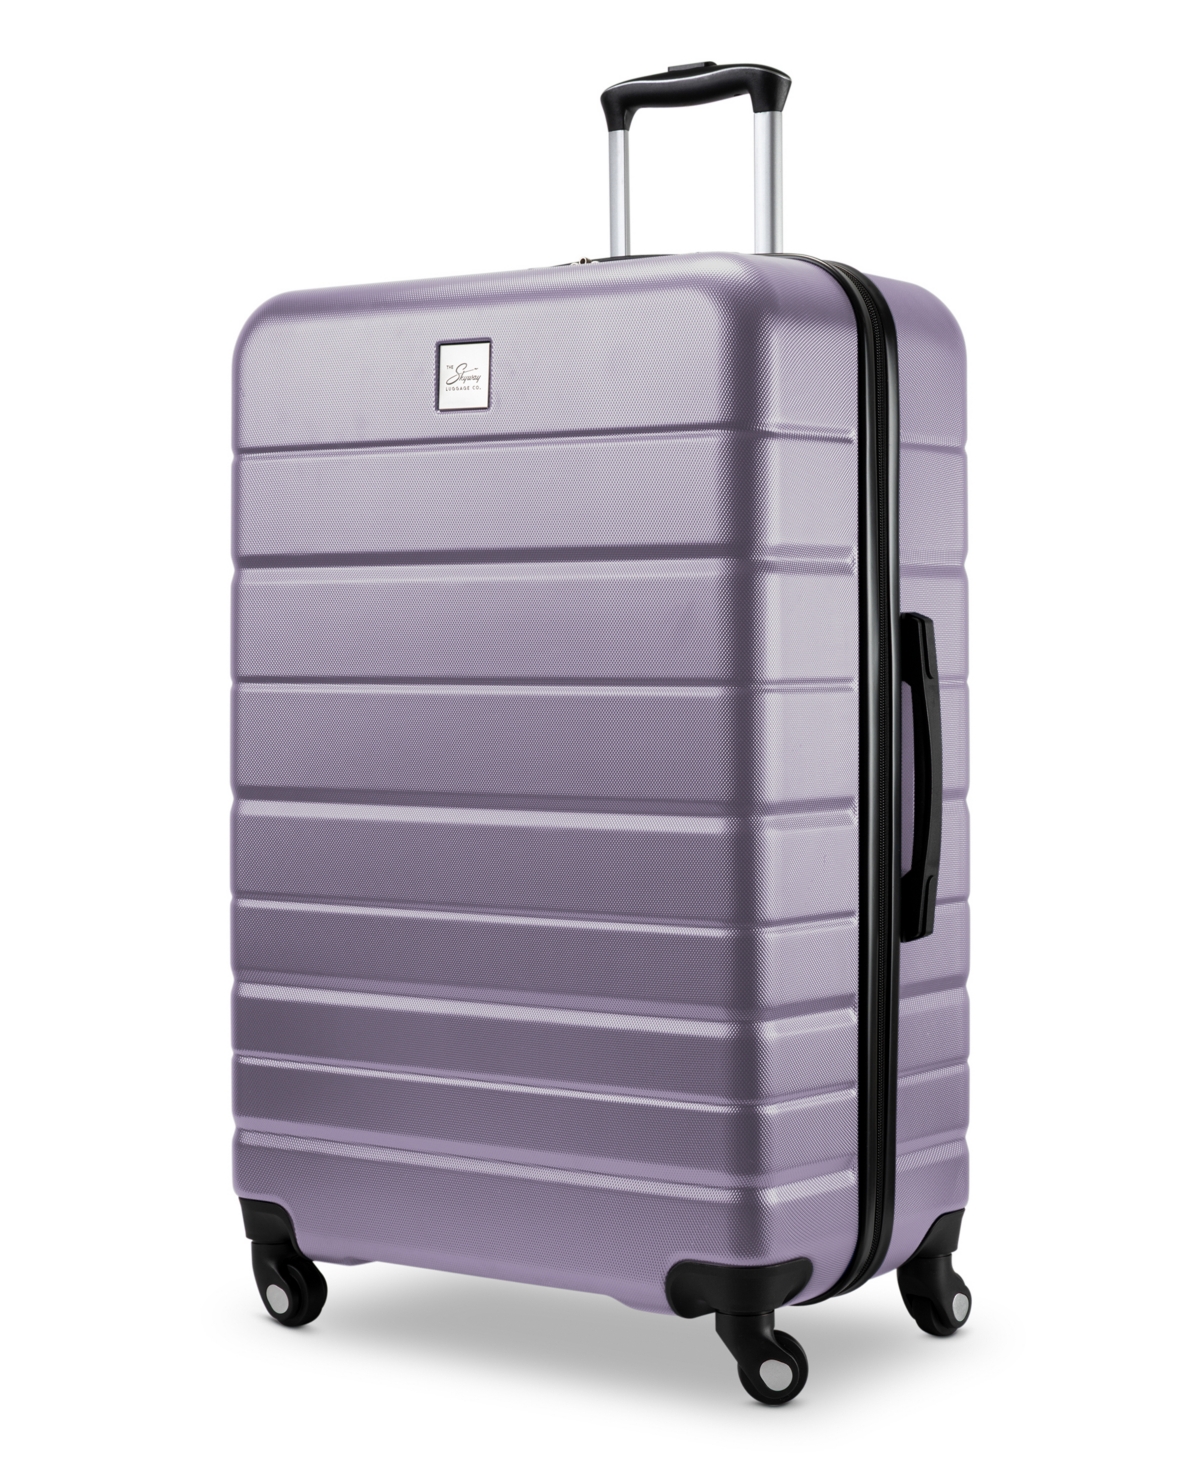 Epic 2.0 Hardside Large Check-in Spinner Suitcase, 28" - Silver-Tone Lilac